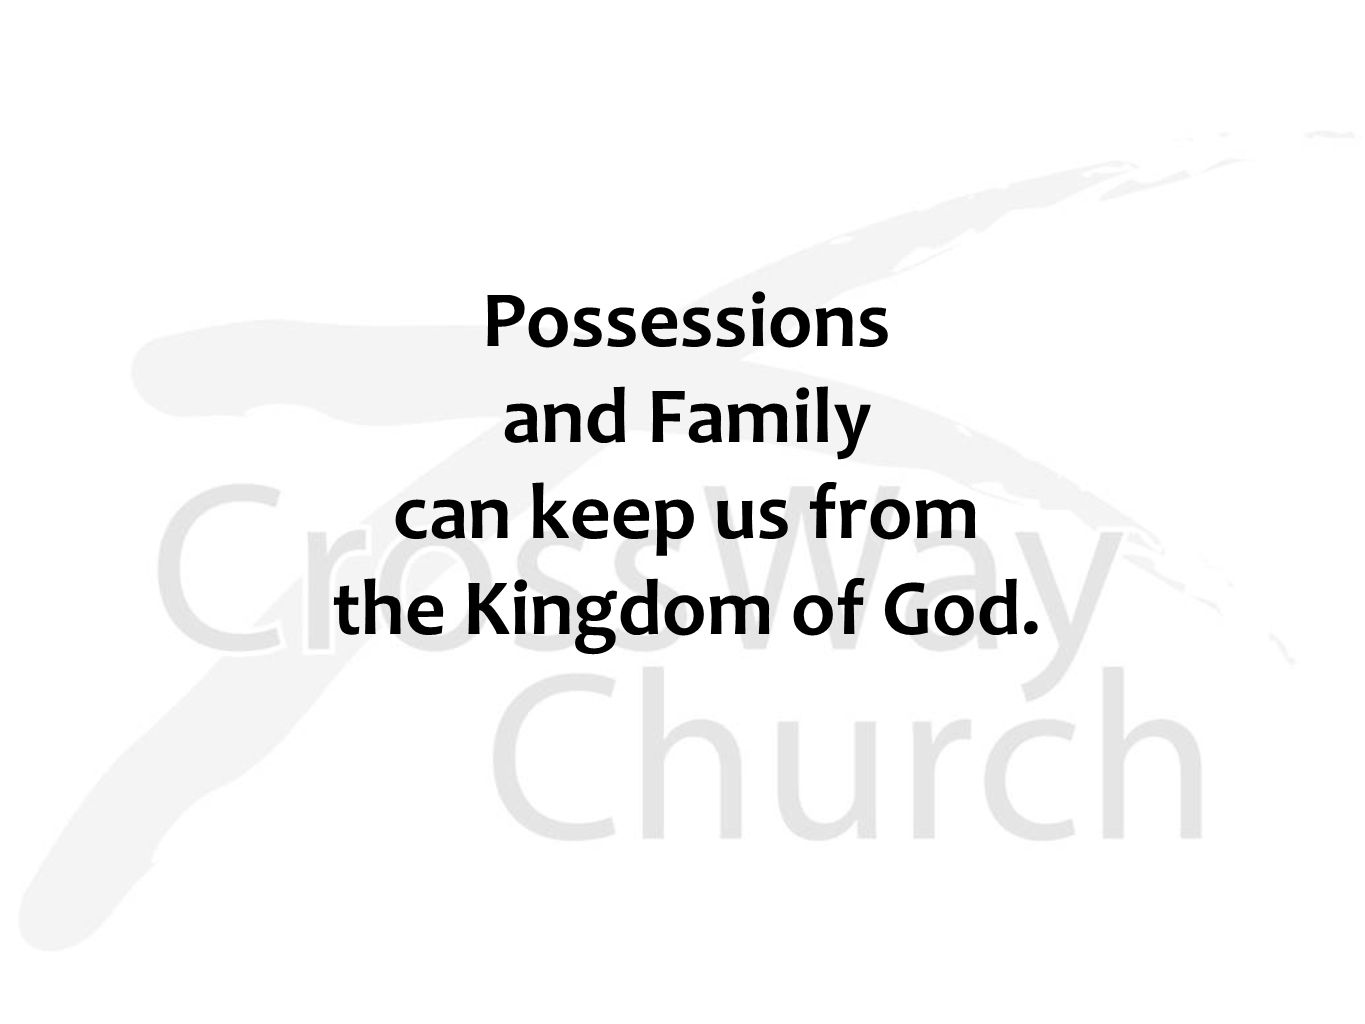 Possessions and Family can keep us from the Kingdom of God.